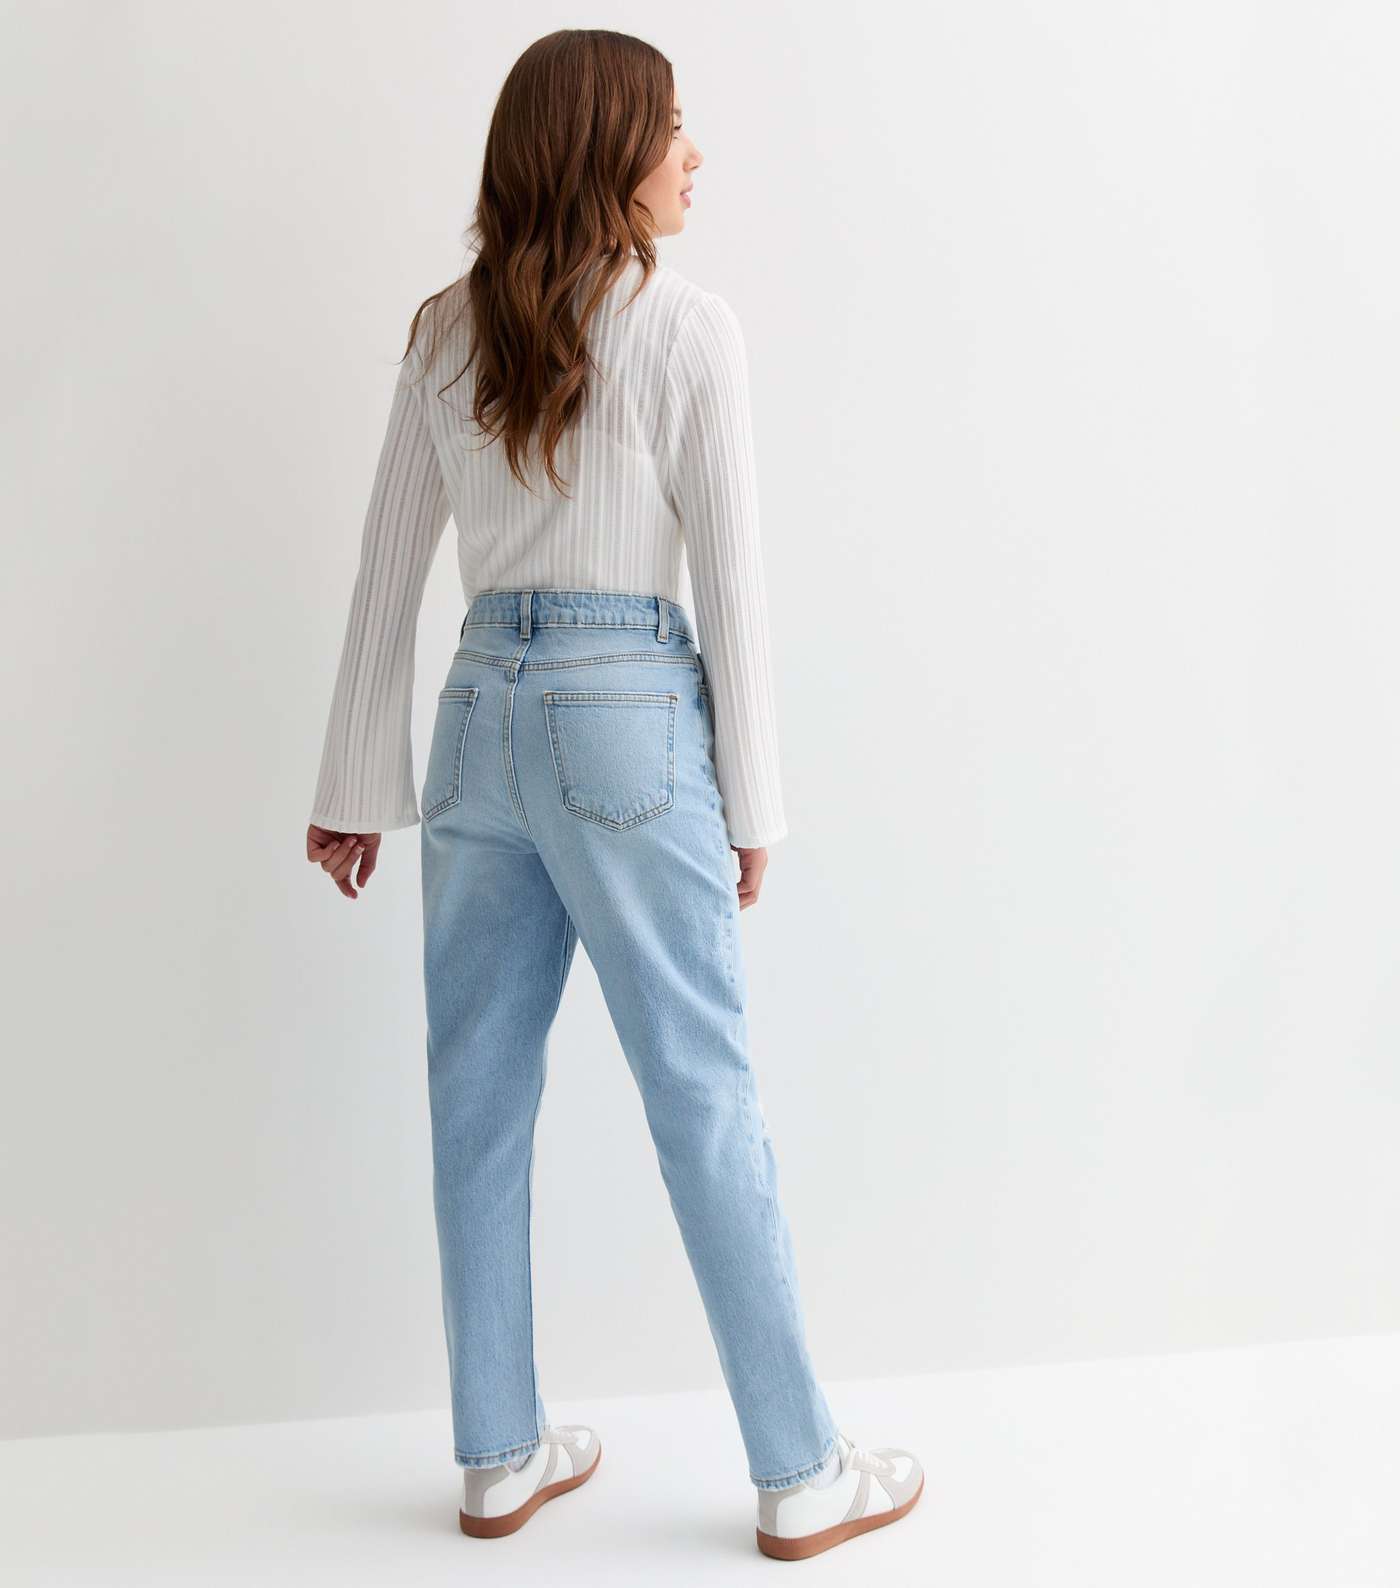 Girls Pale Blue High Waist Ripped Knee Mom Jeans Image 6